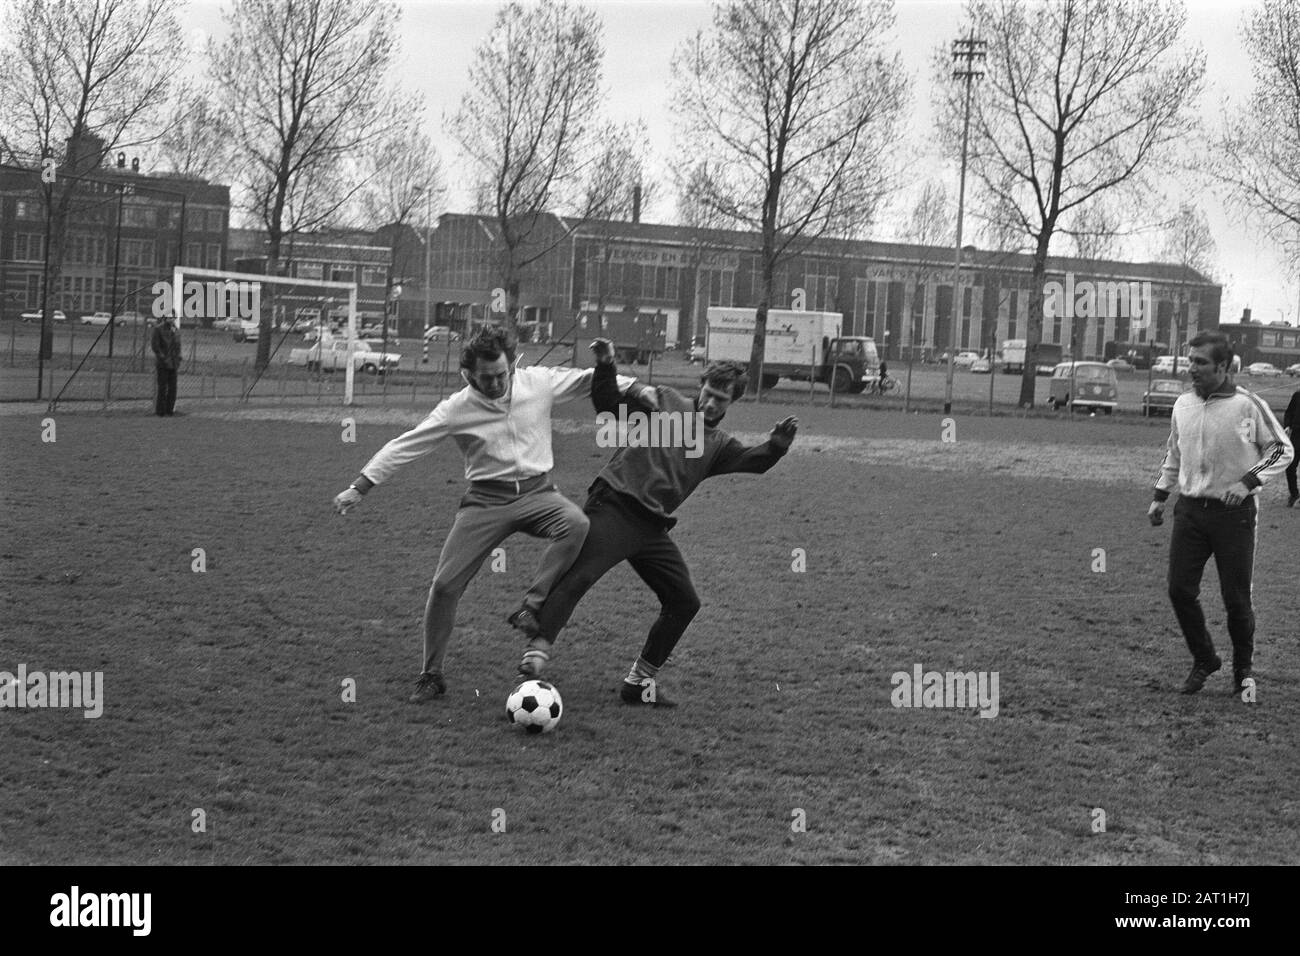 Training Feijenoord  Ernst Happel (l) en Henk Wery (r) during training Date: 23 april 1970 Location: Rotterdam, South-Holland Keywords: trainers, trainers, football Personnel: Happel, Ernst, Wery, Henk Institution name: Feyenoord Stock Photo